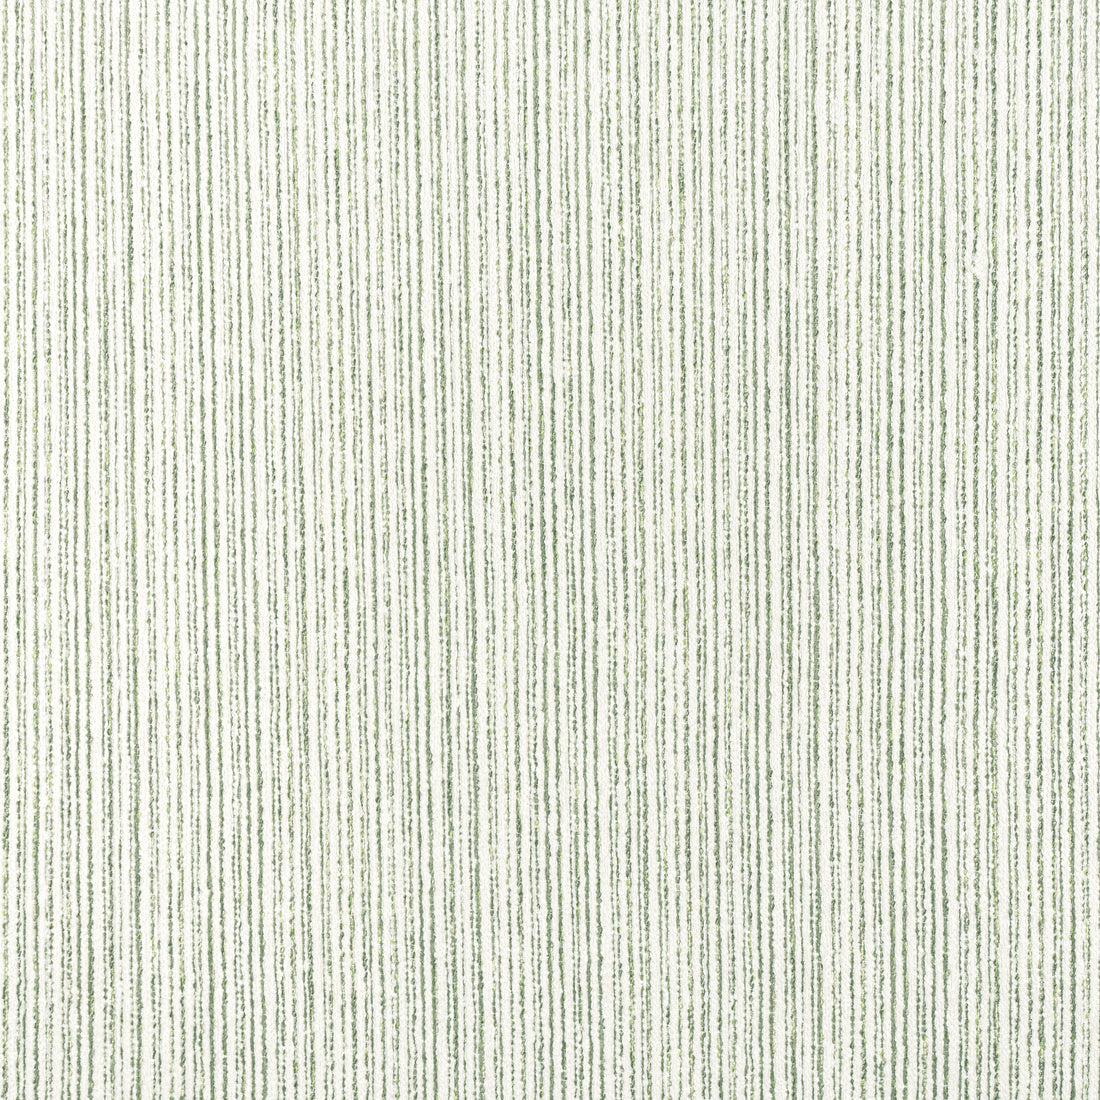 Zia Stripe fabric in aloe color - pattern number W8805 - by Thibaut in the Haven collection